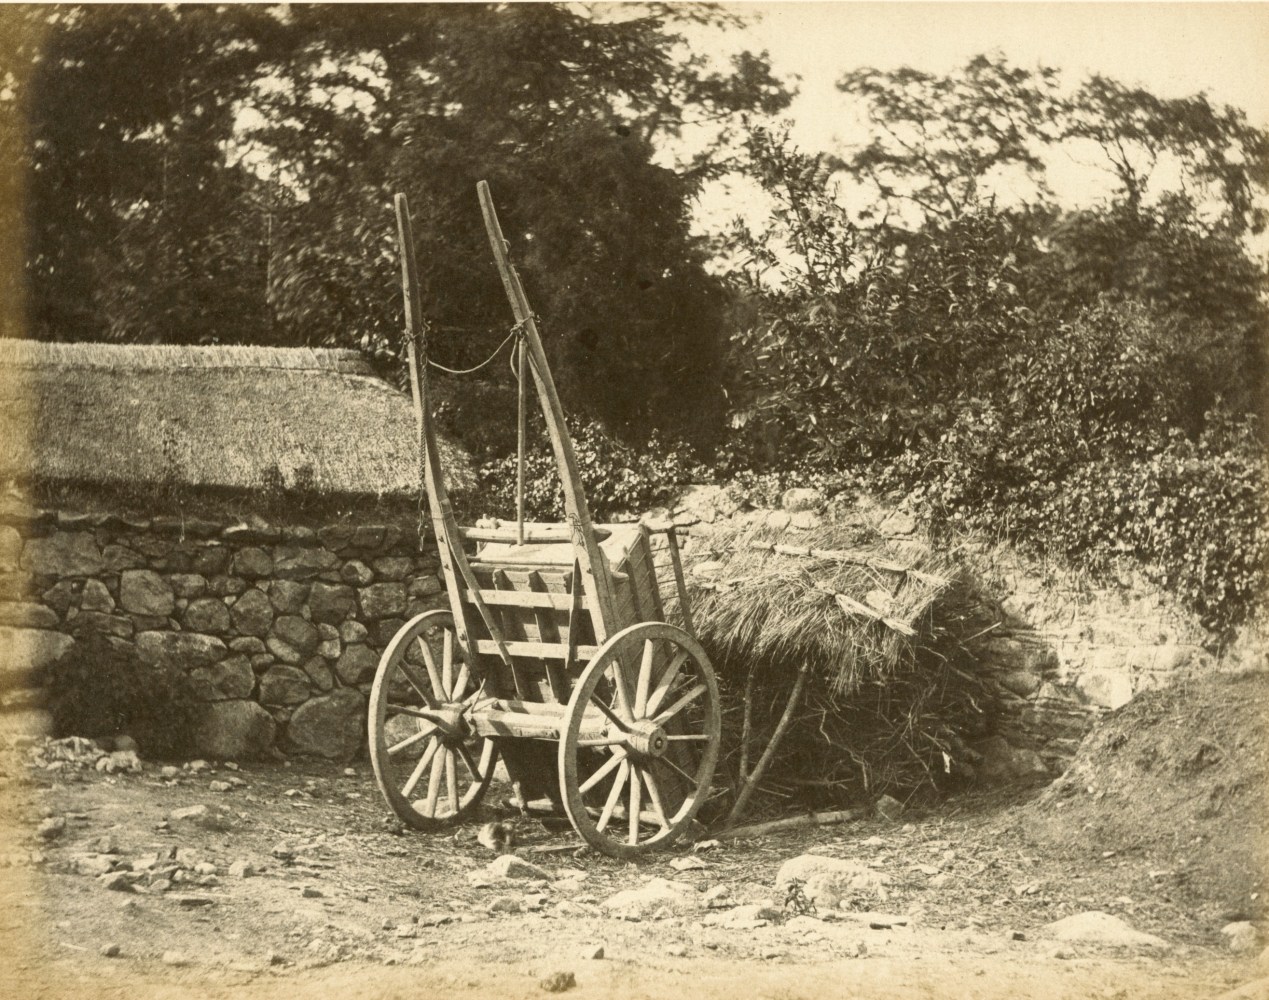 Hugh OWEN (English, 1808-1897) Cart and thatched kindling storehouse Albumen print, 1860s-1870s, from a paper negative, before 1855 17.6 x 22.5 cm mounted on 26.0 x 28.3 cm album sheet Numbered &quot;36&quot; in pencil on mount